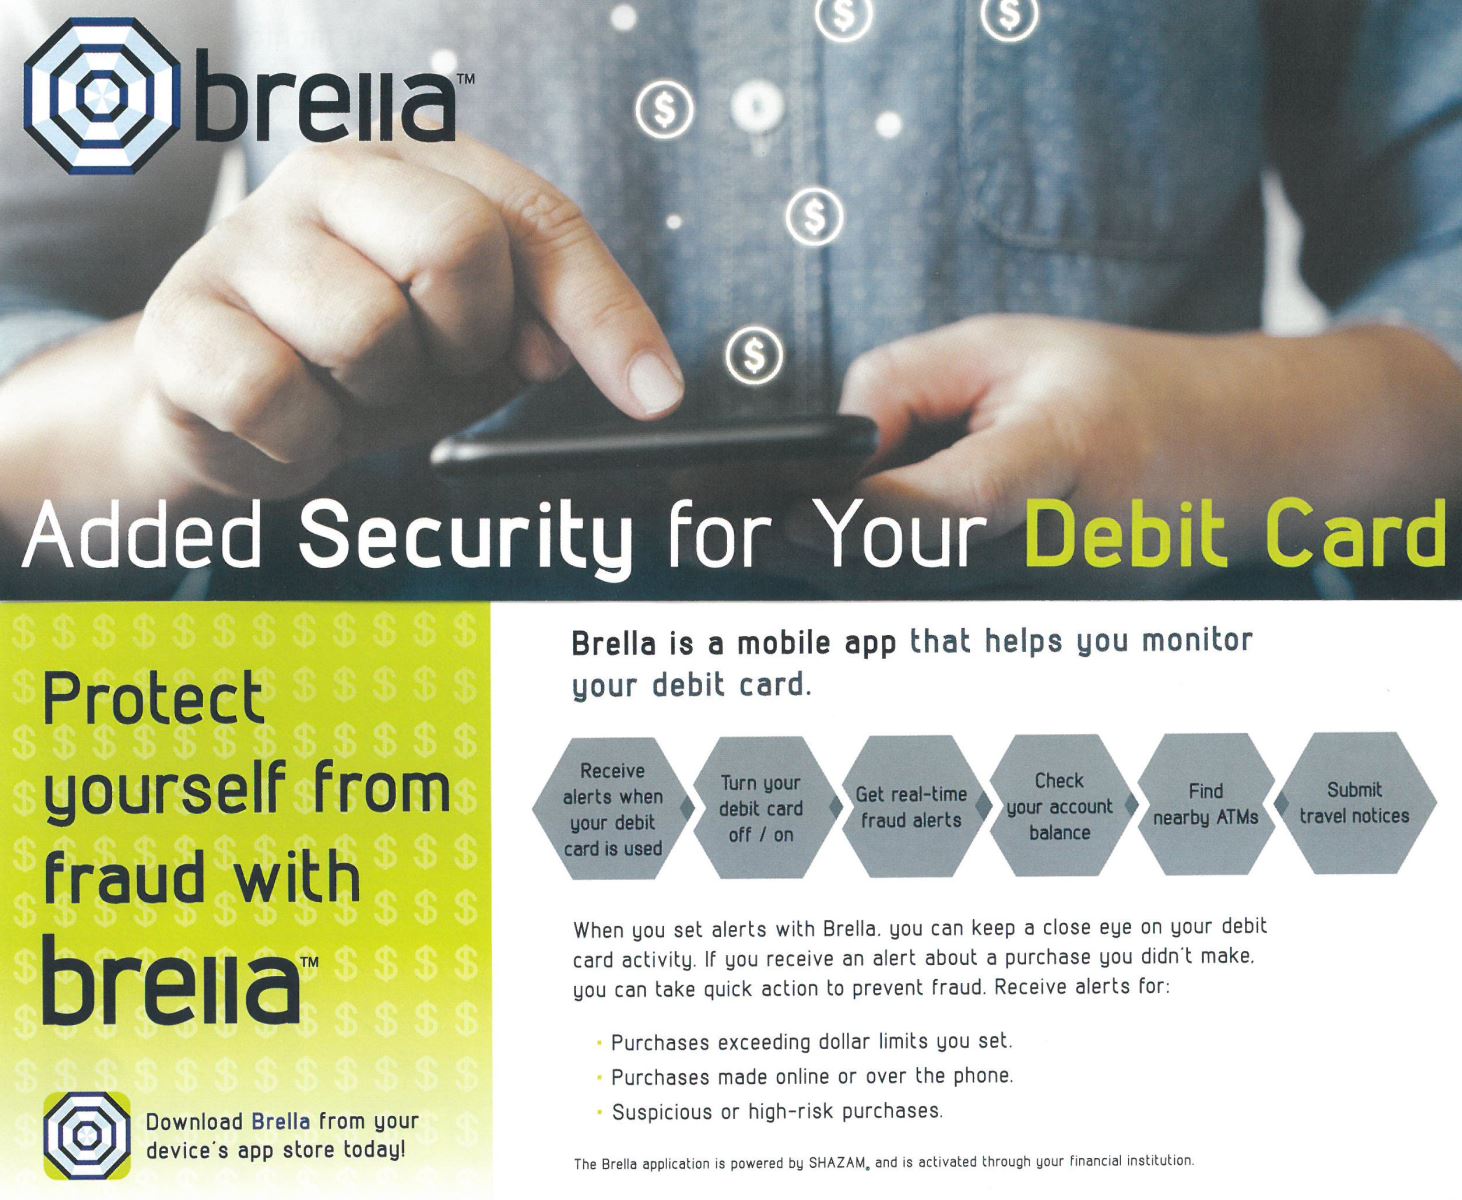 brella info card. Added security for your debit card. Protect yourself from fraud with Brella. Download Brella from your device's app store today! Brella  is a mobile app that helps you monitor your debit card.